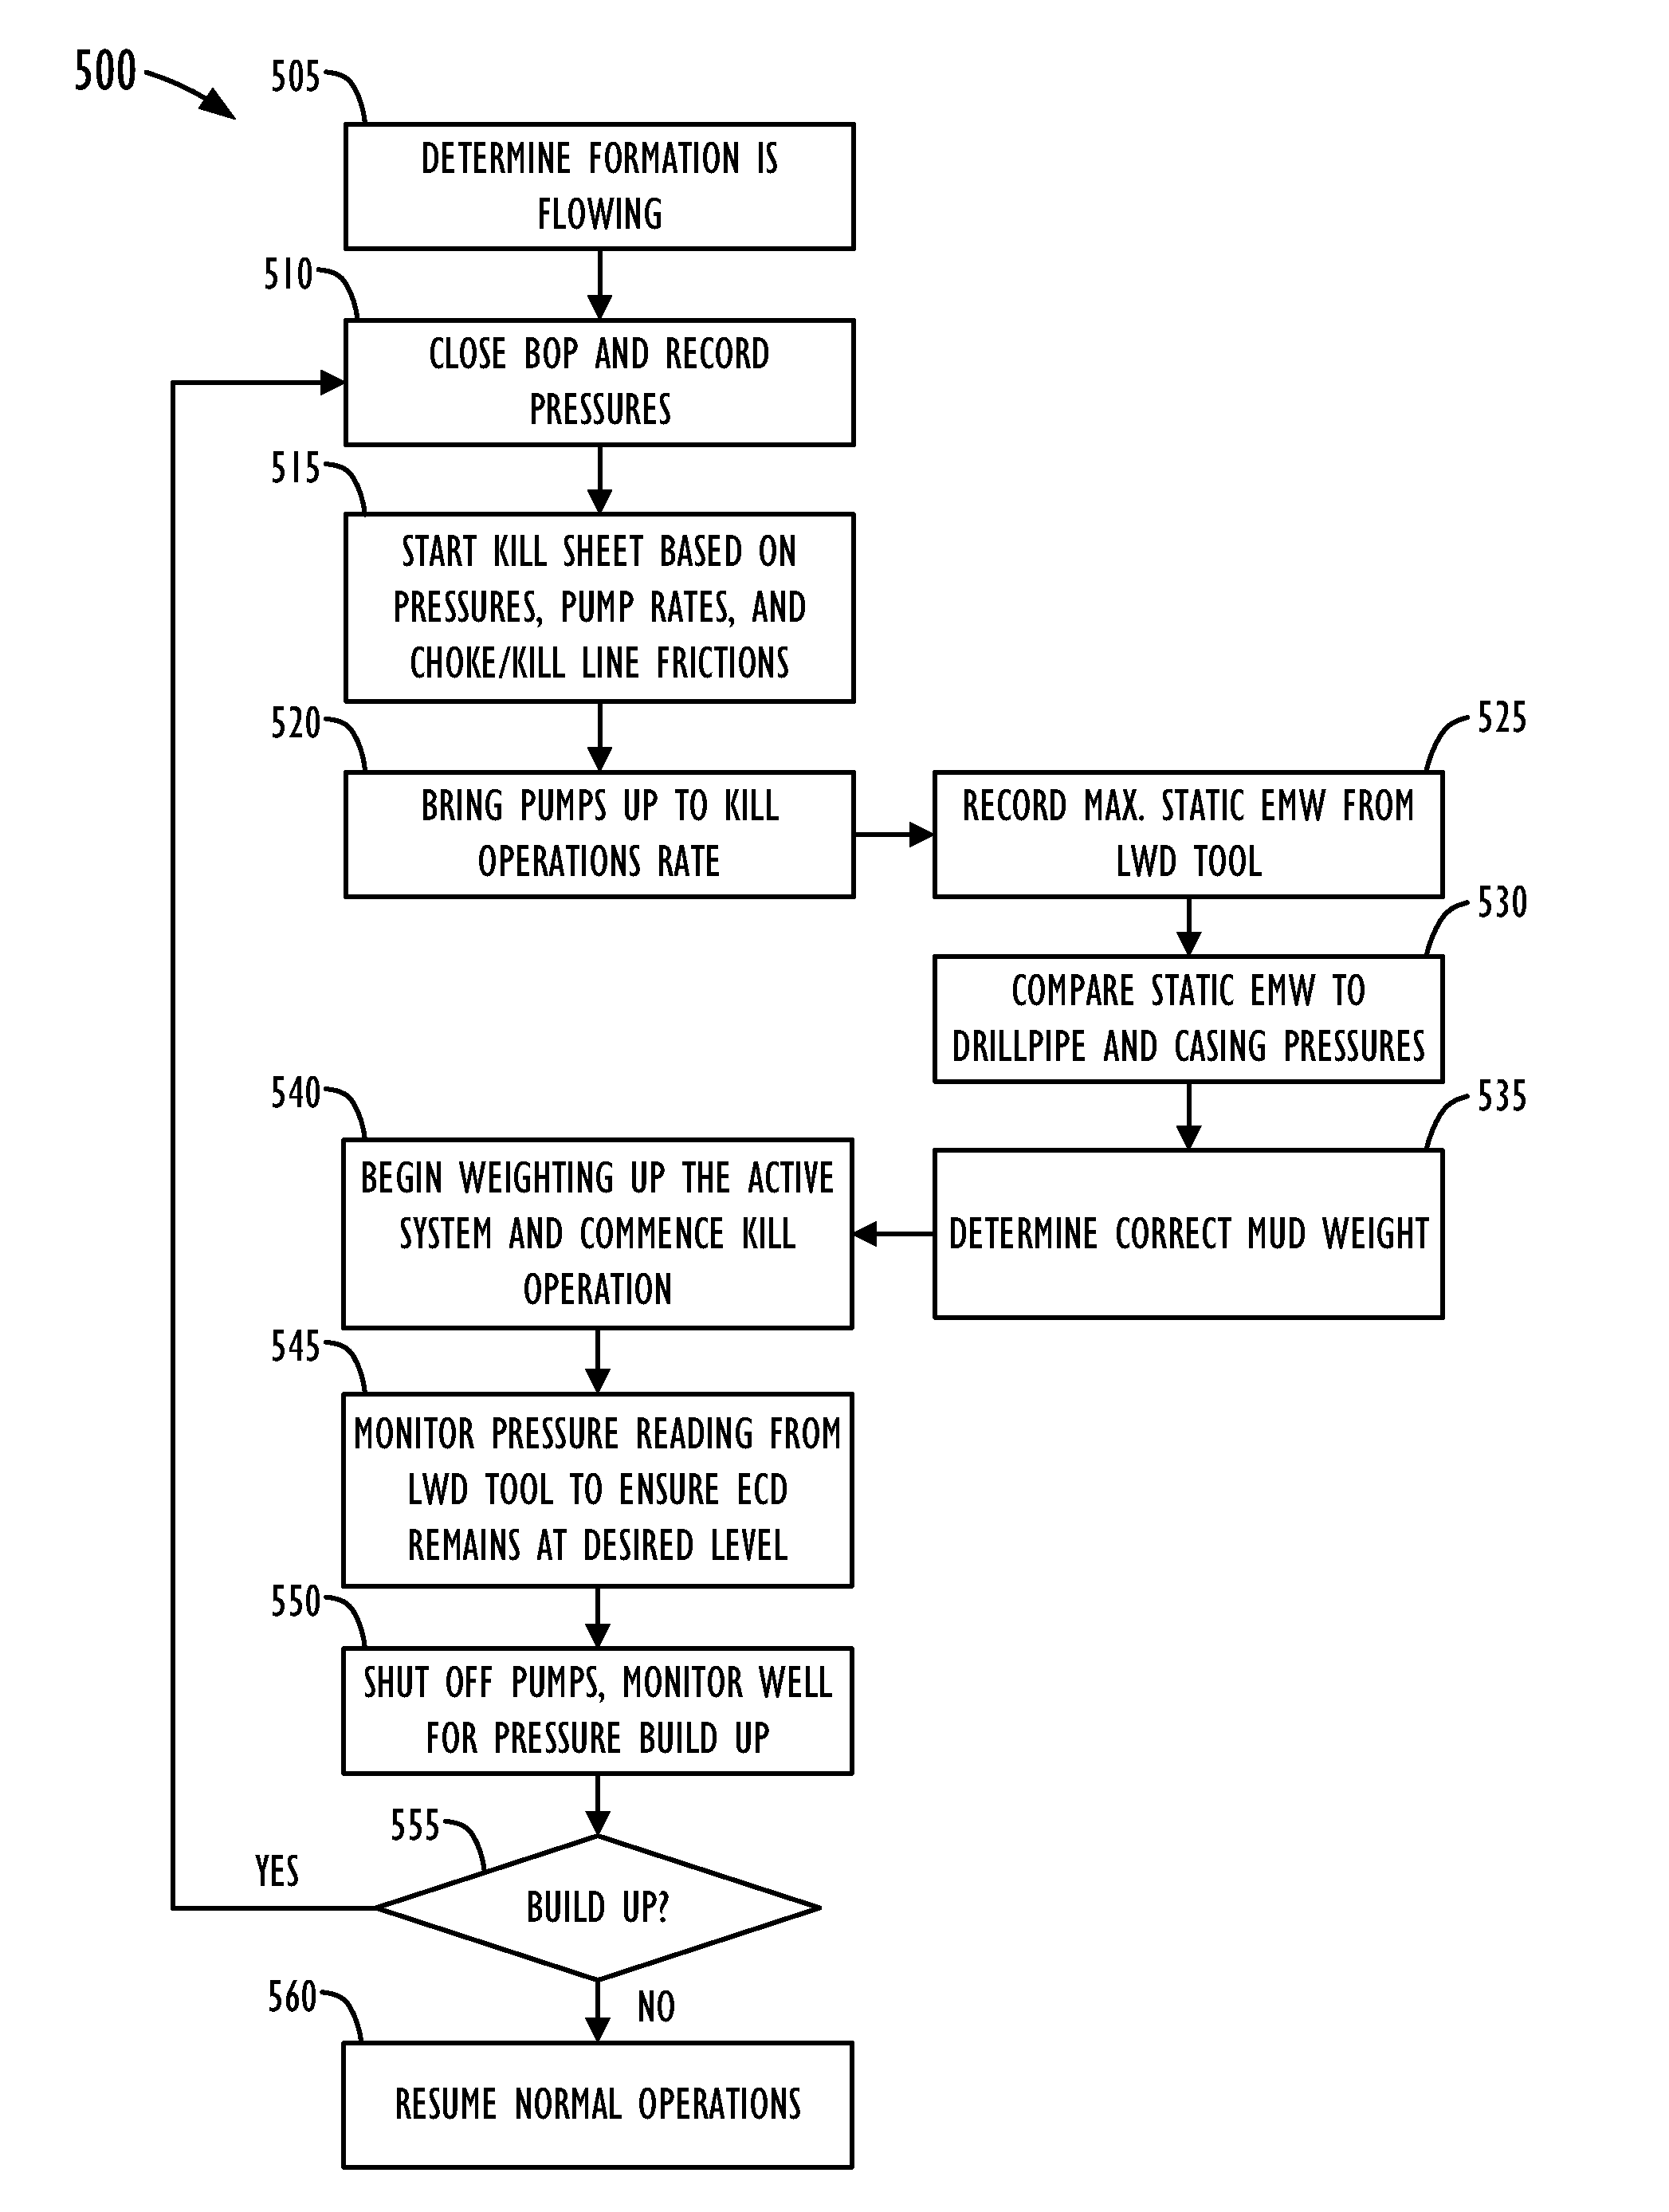 System and method for obtaining and using downhole data during well control operations